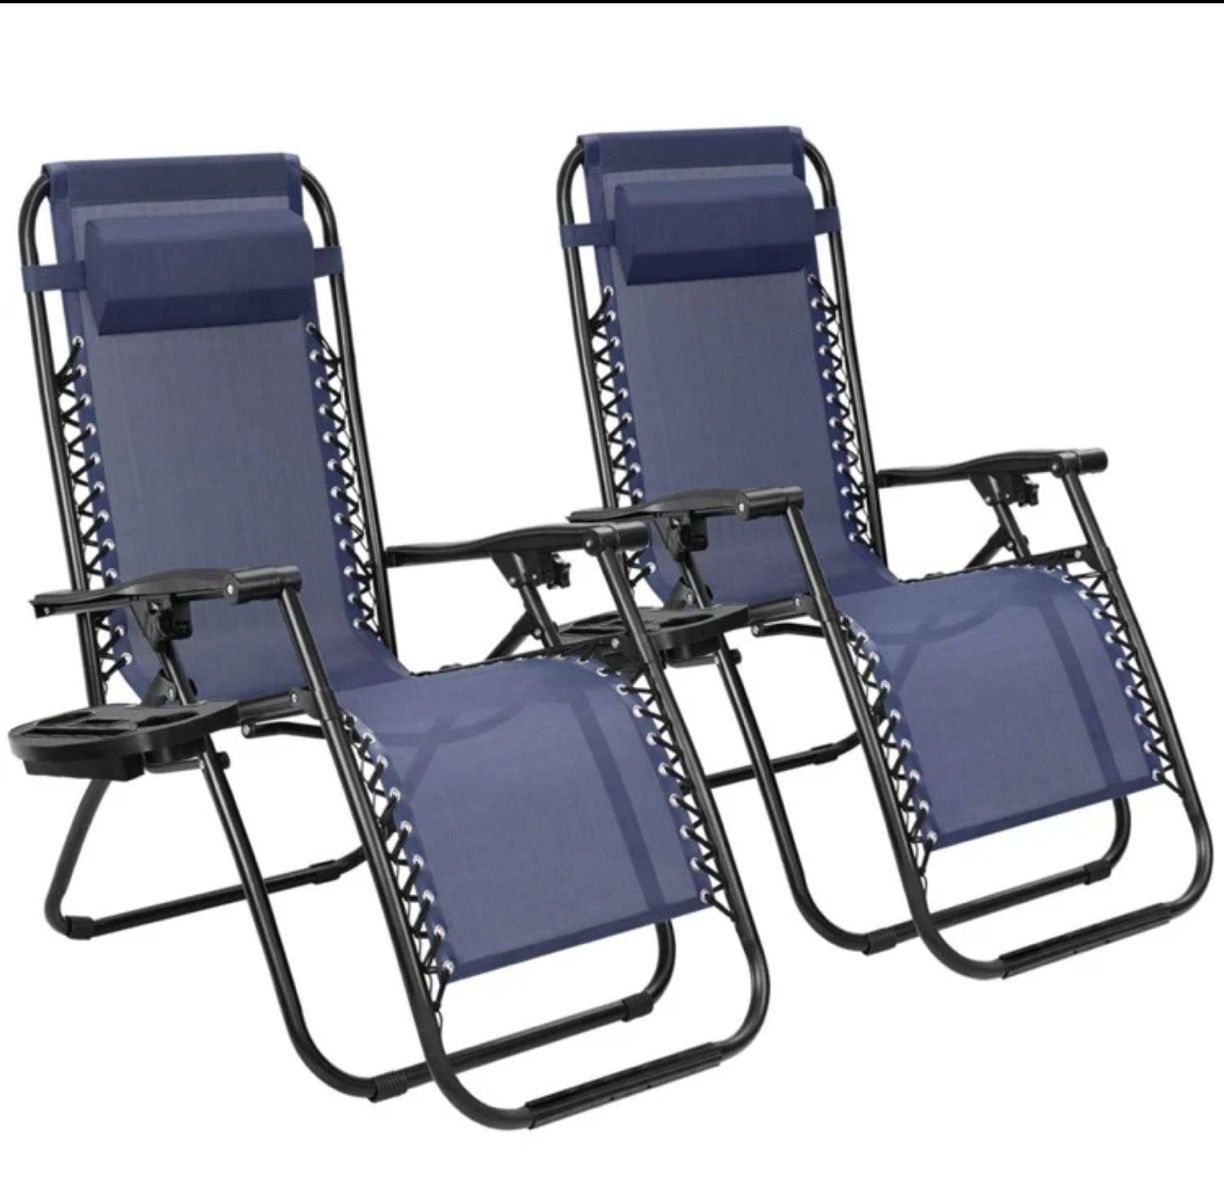 Set of 2 Relaxing Recliners Patio Chairs Adjustable Steel Mesh Zero Gravity Lounge Chair Beach Chairs with Pillow and Cup Holder (Blue)